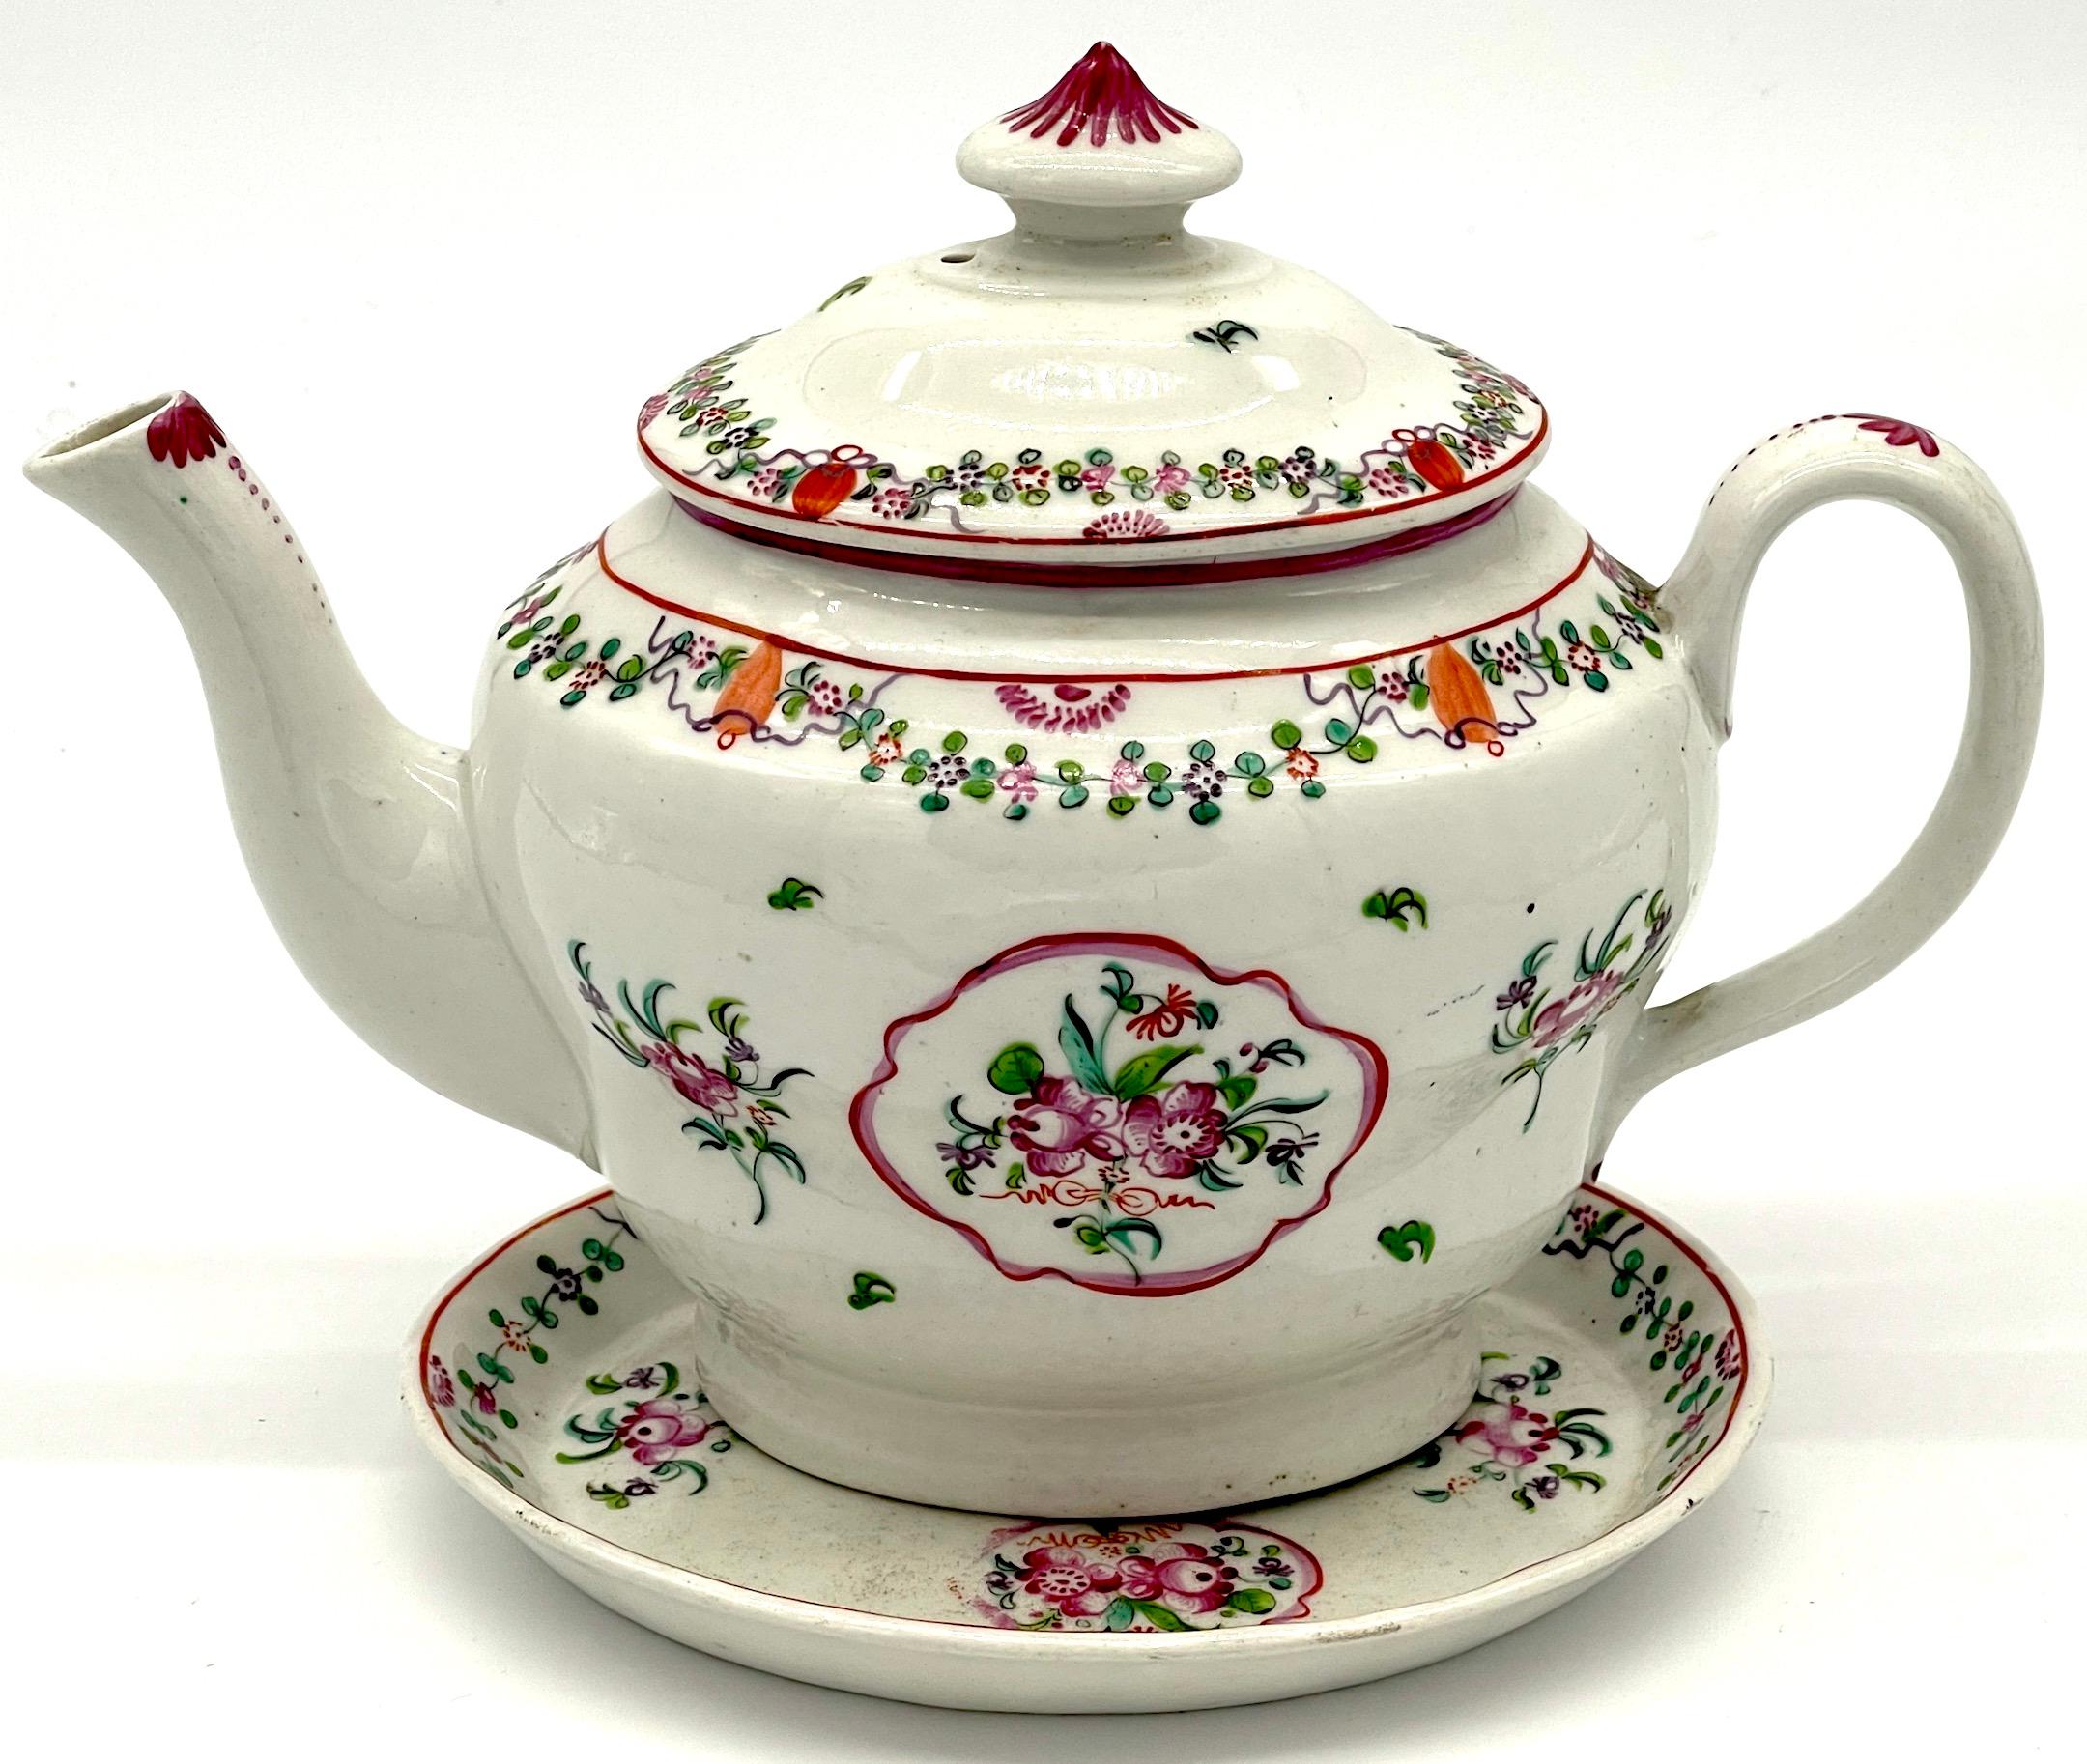 19th C English New Hall Hand Painted Teapot & Trivet, Chinese Export Style

This is a rare and exquisite surviving pair of early 19th-century English porcelain tea articles,  featuring a teapot and a matching porcelain teapot stand or trivet. Both